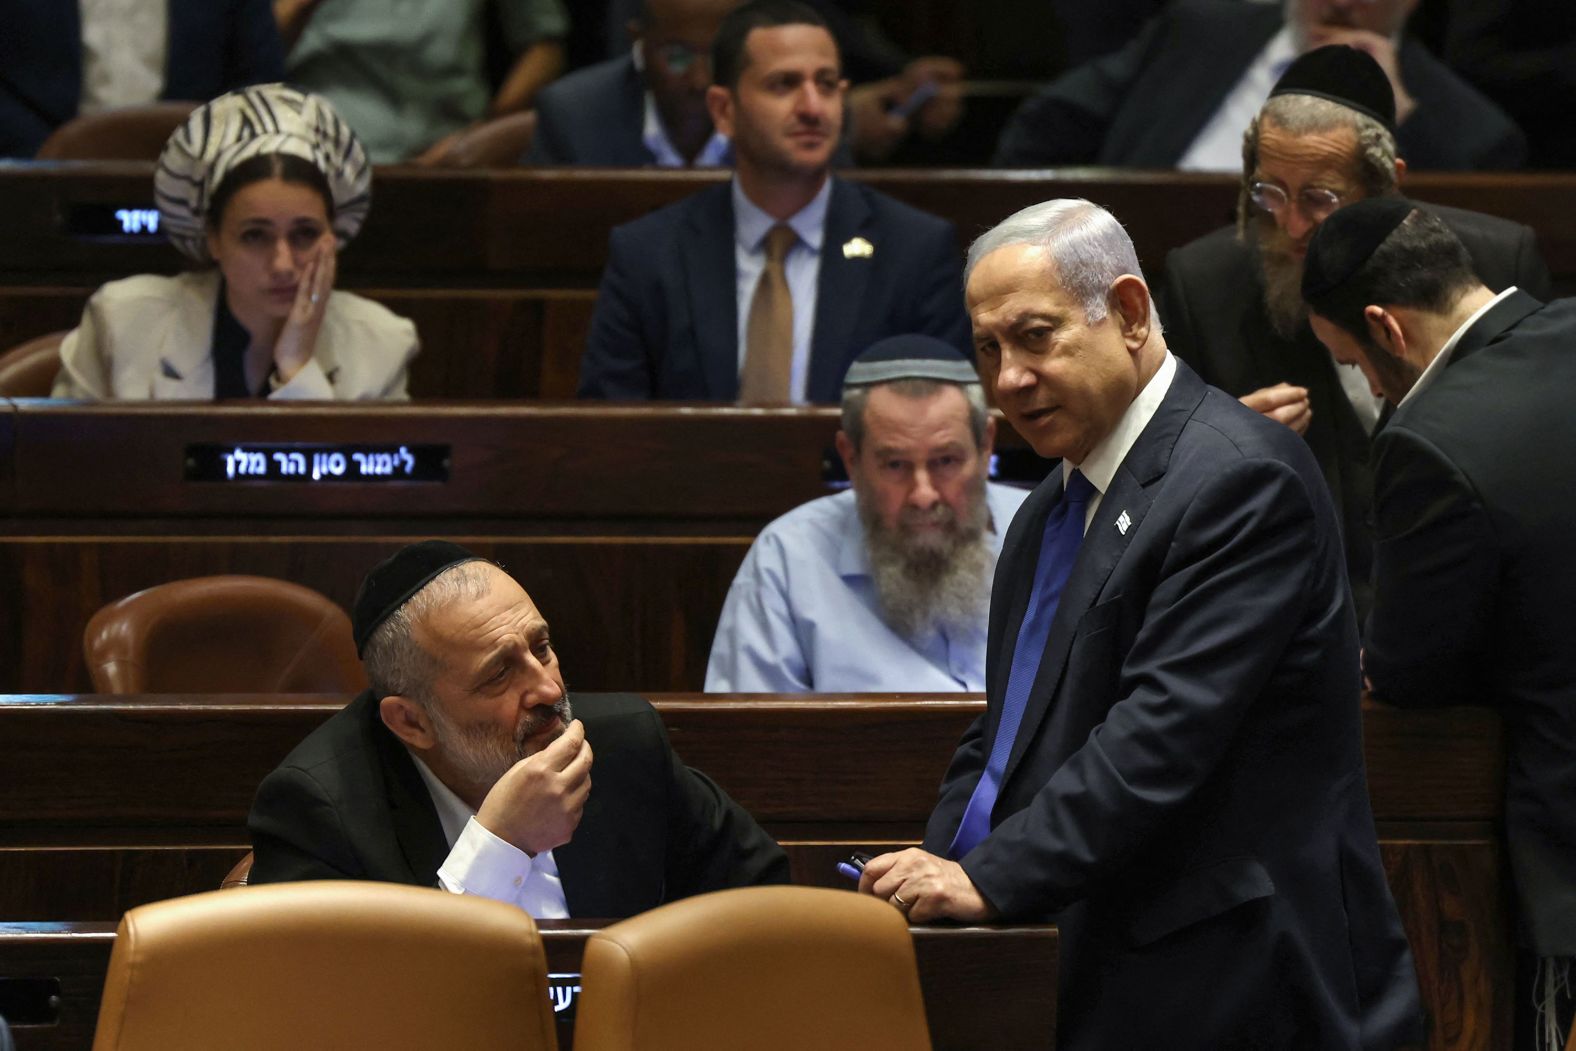 Israeli Prime Minister Benjamin Netanyahu, right, speaks with Aryeh Deri, chairman of the ultra-Orthodox party Shas, during a Knesset session on July 24.